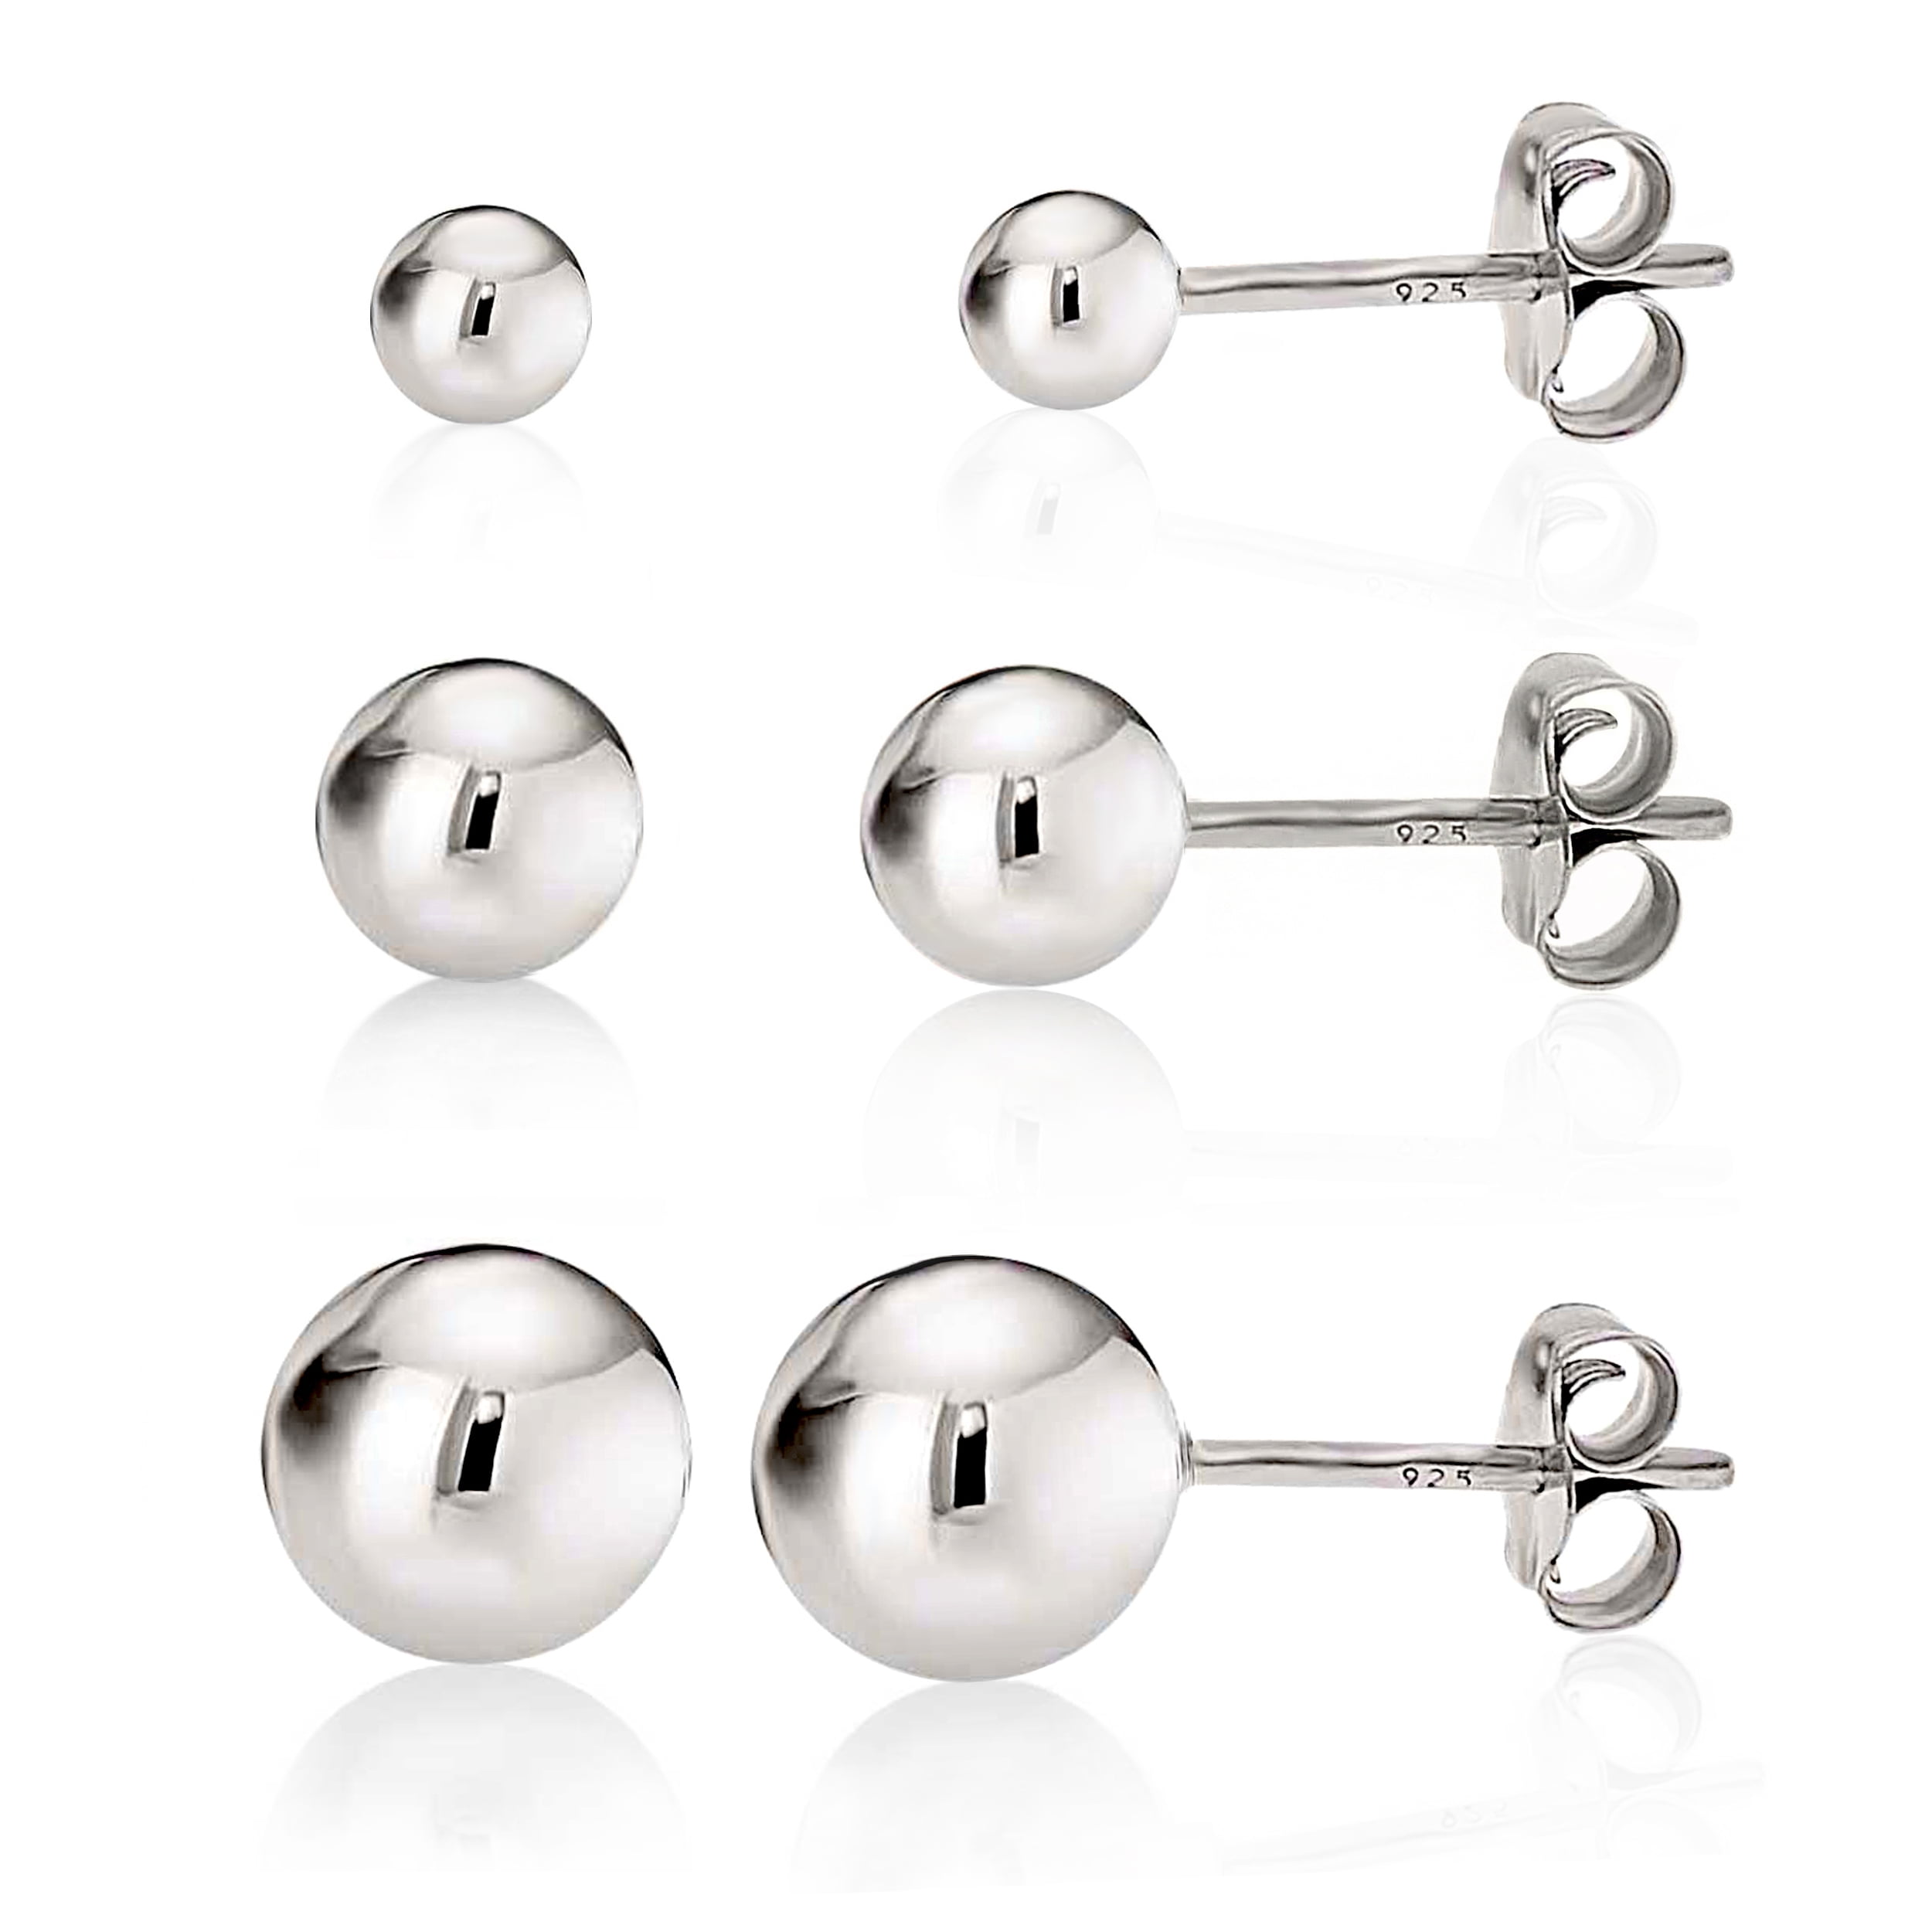 Sterling Silver Set of 3 Tri-Color Polished 5mm Ball Stud Earrings Set